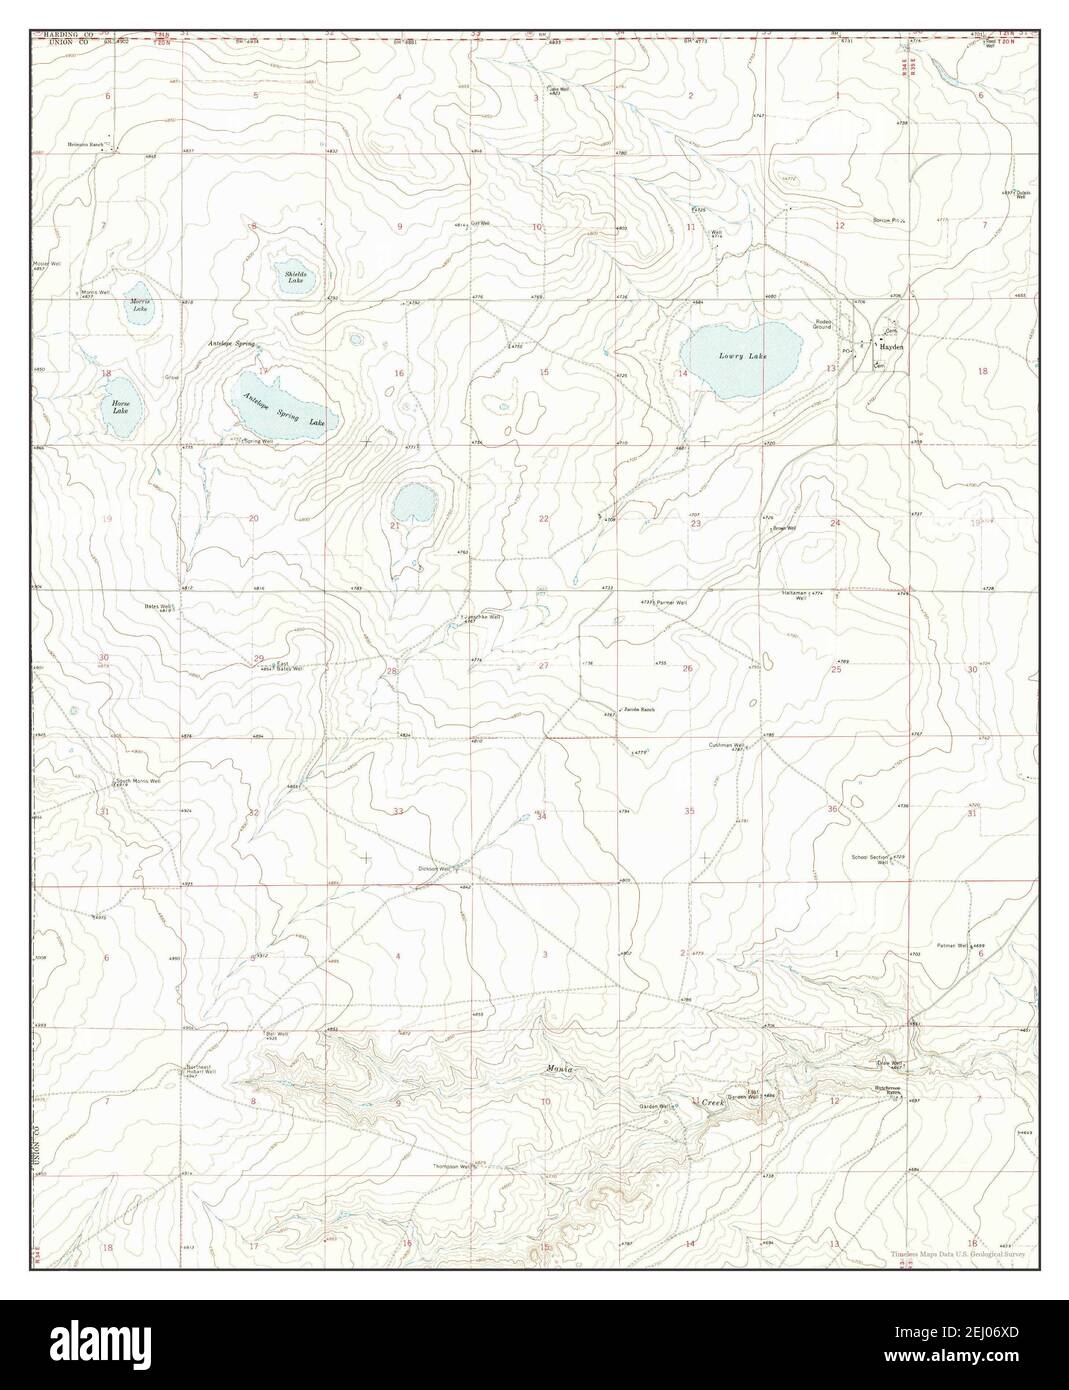 Hayden, New Mexico, map 1966, 1:24000, United States of America by Timeless Maps, data U.S. Geological Survey Stock Photo